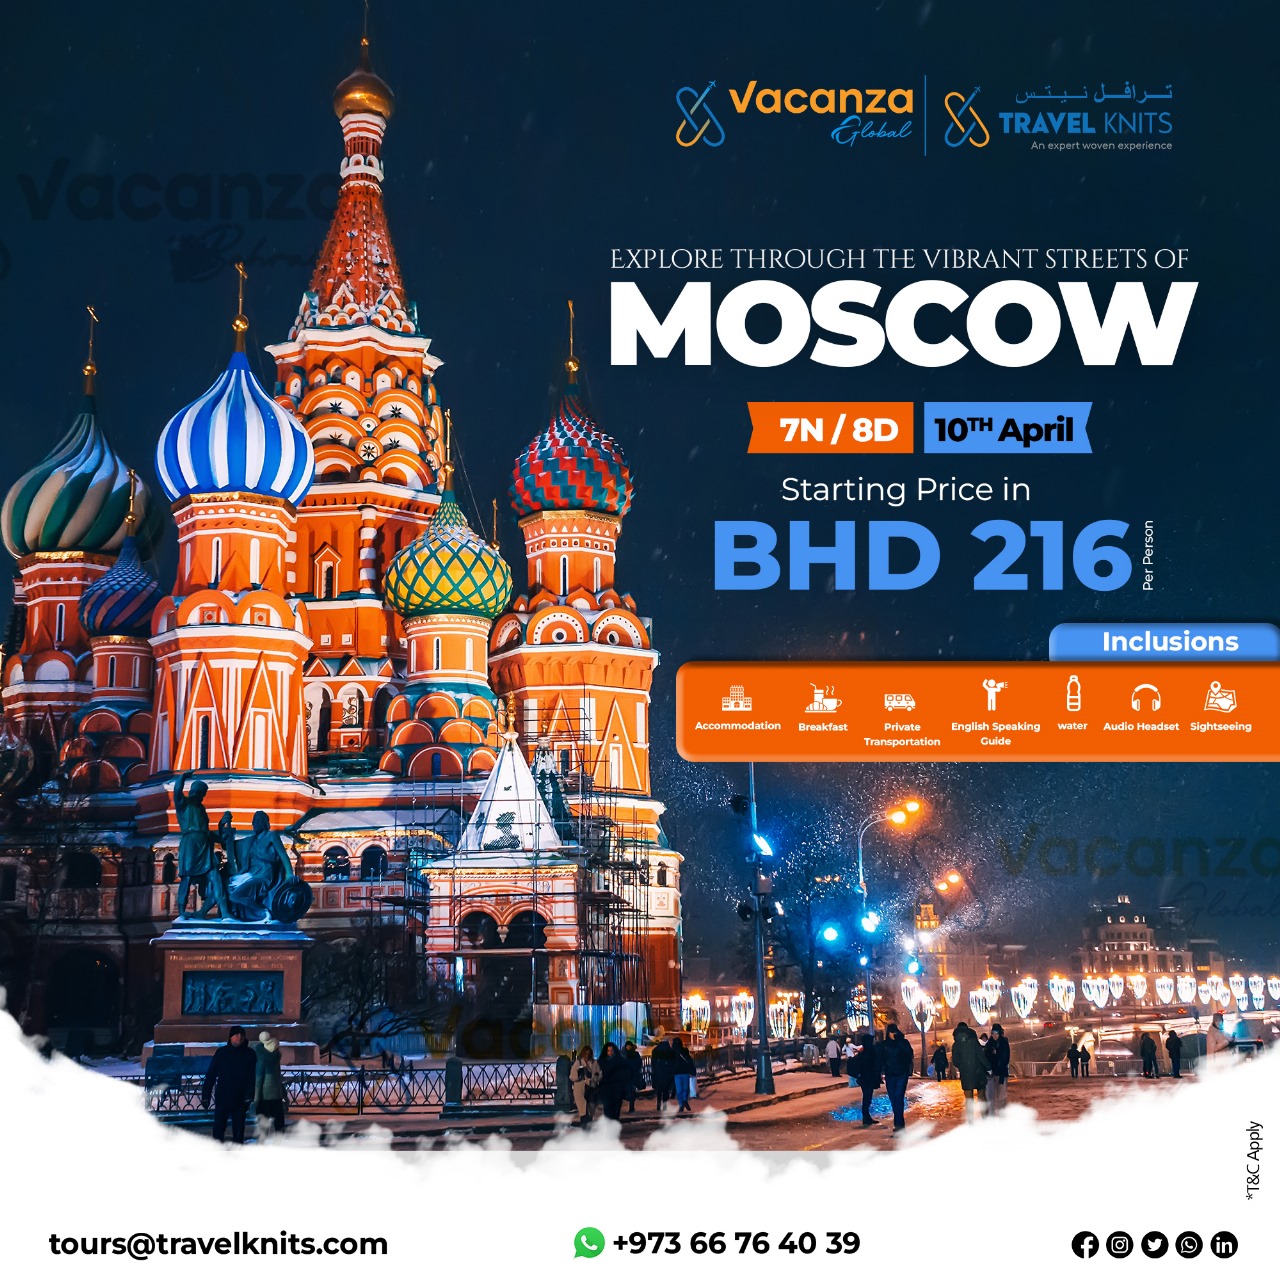 Eid holiday in Moscow|Russia 1Tour Packages - Book honeymoon ,family,adventure tour packages to Russia 1|Travel Knits												